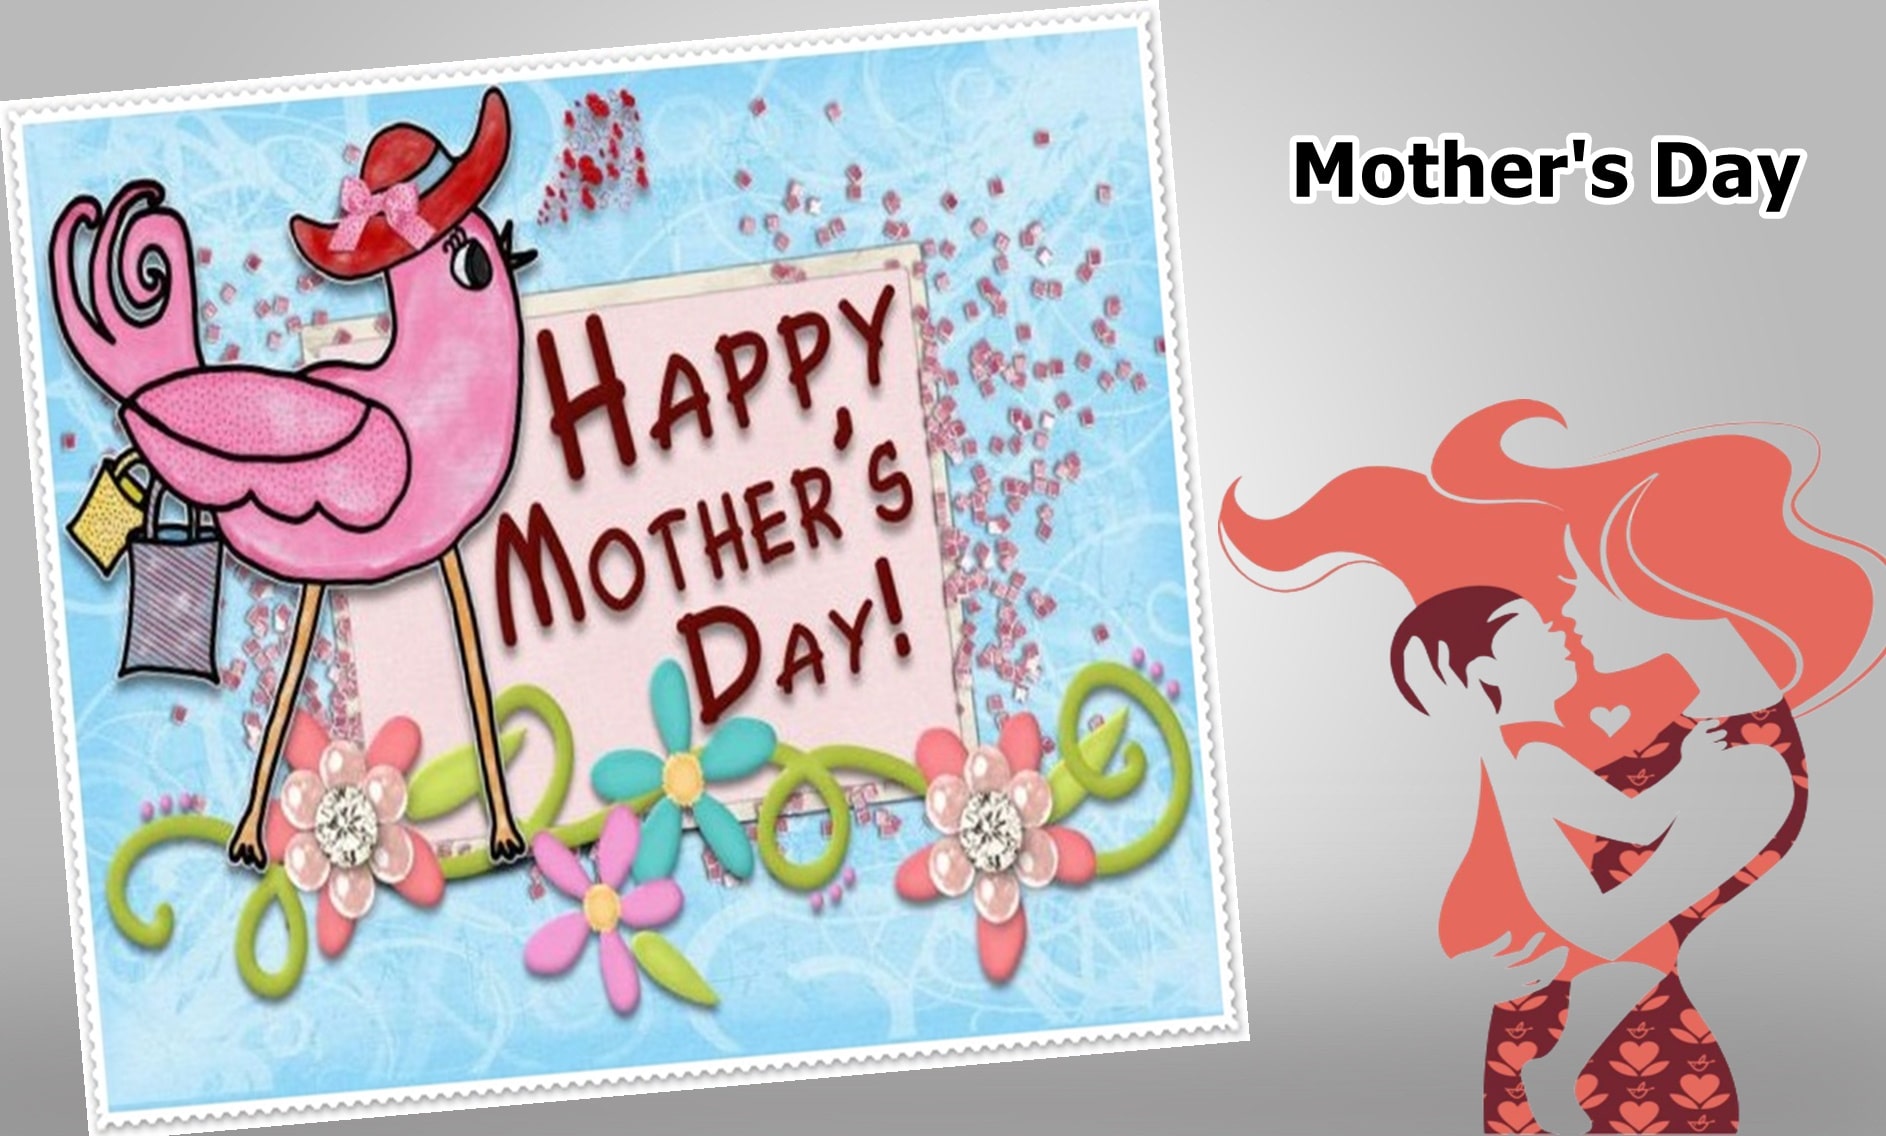 Happy Mothers Day Image Pictures And Wallpaper